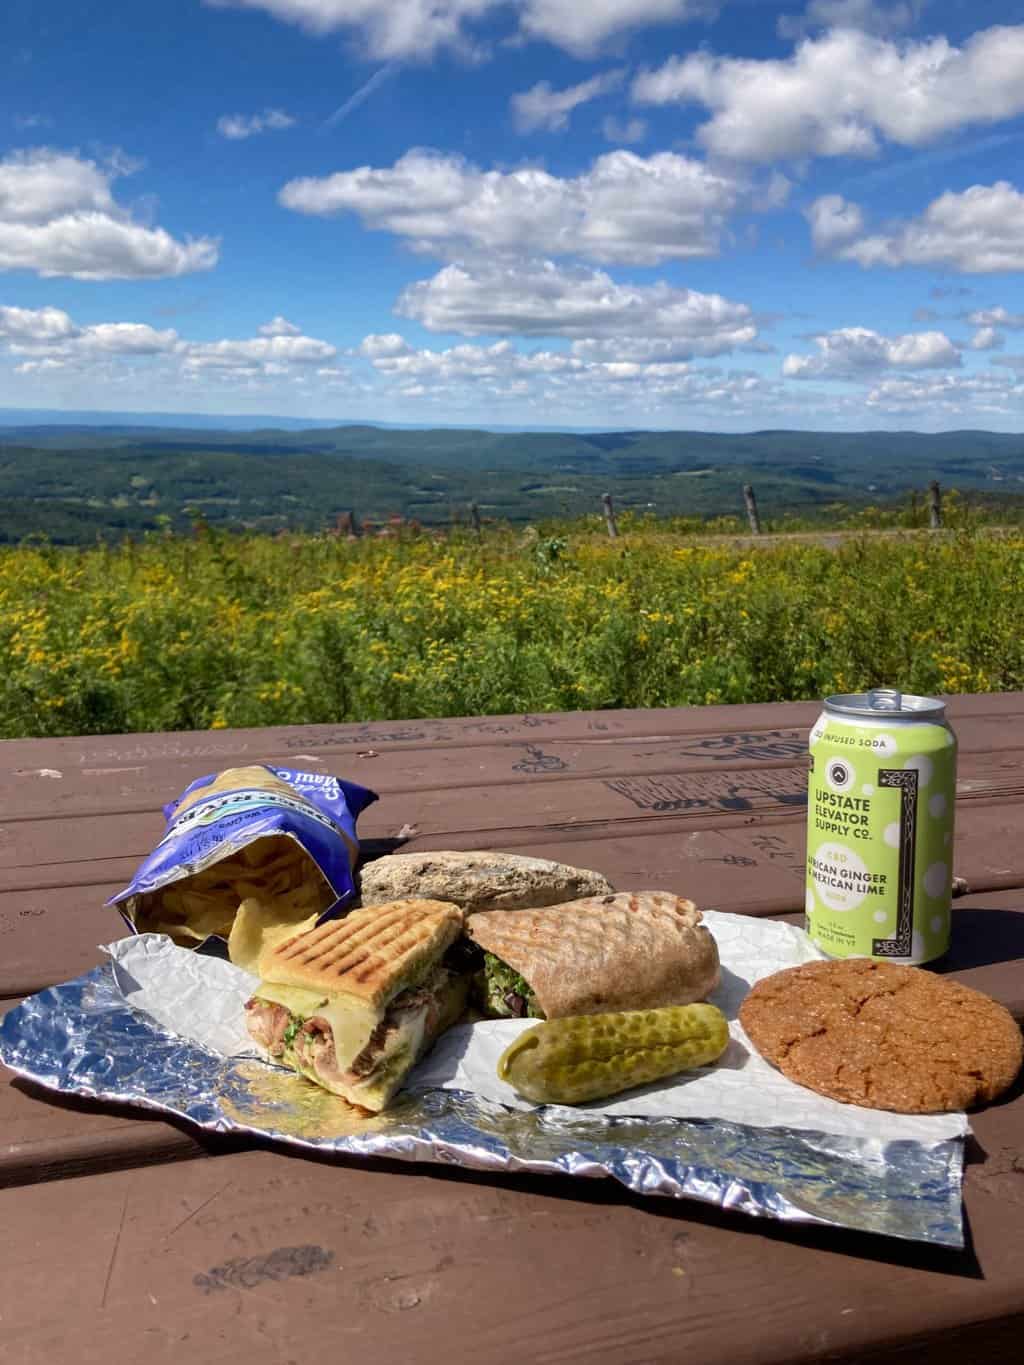 Picnic lunch with a view of the mountains in Pittsfield, MA.